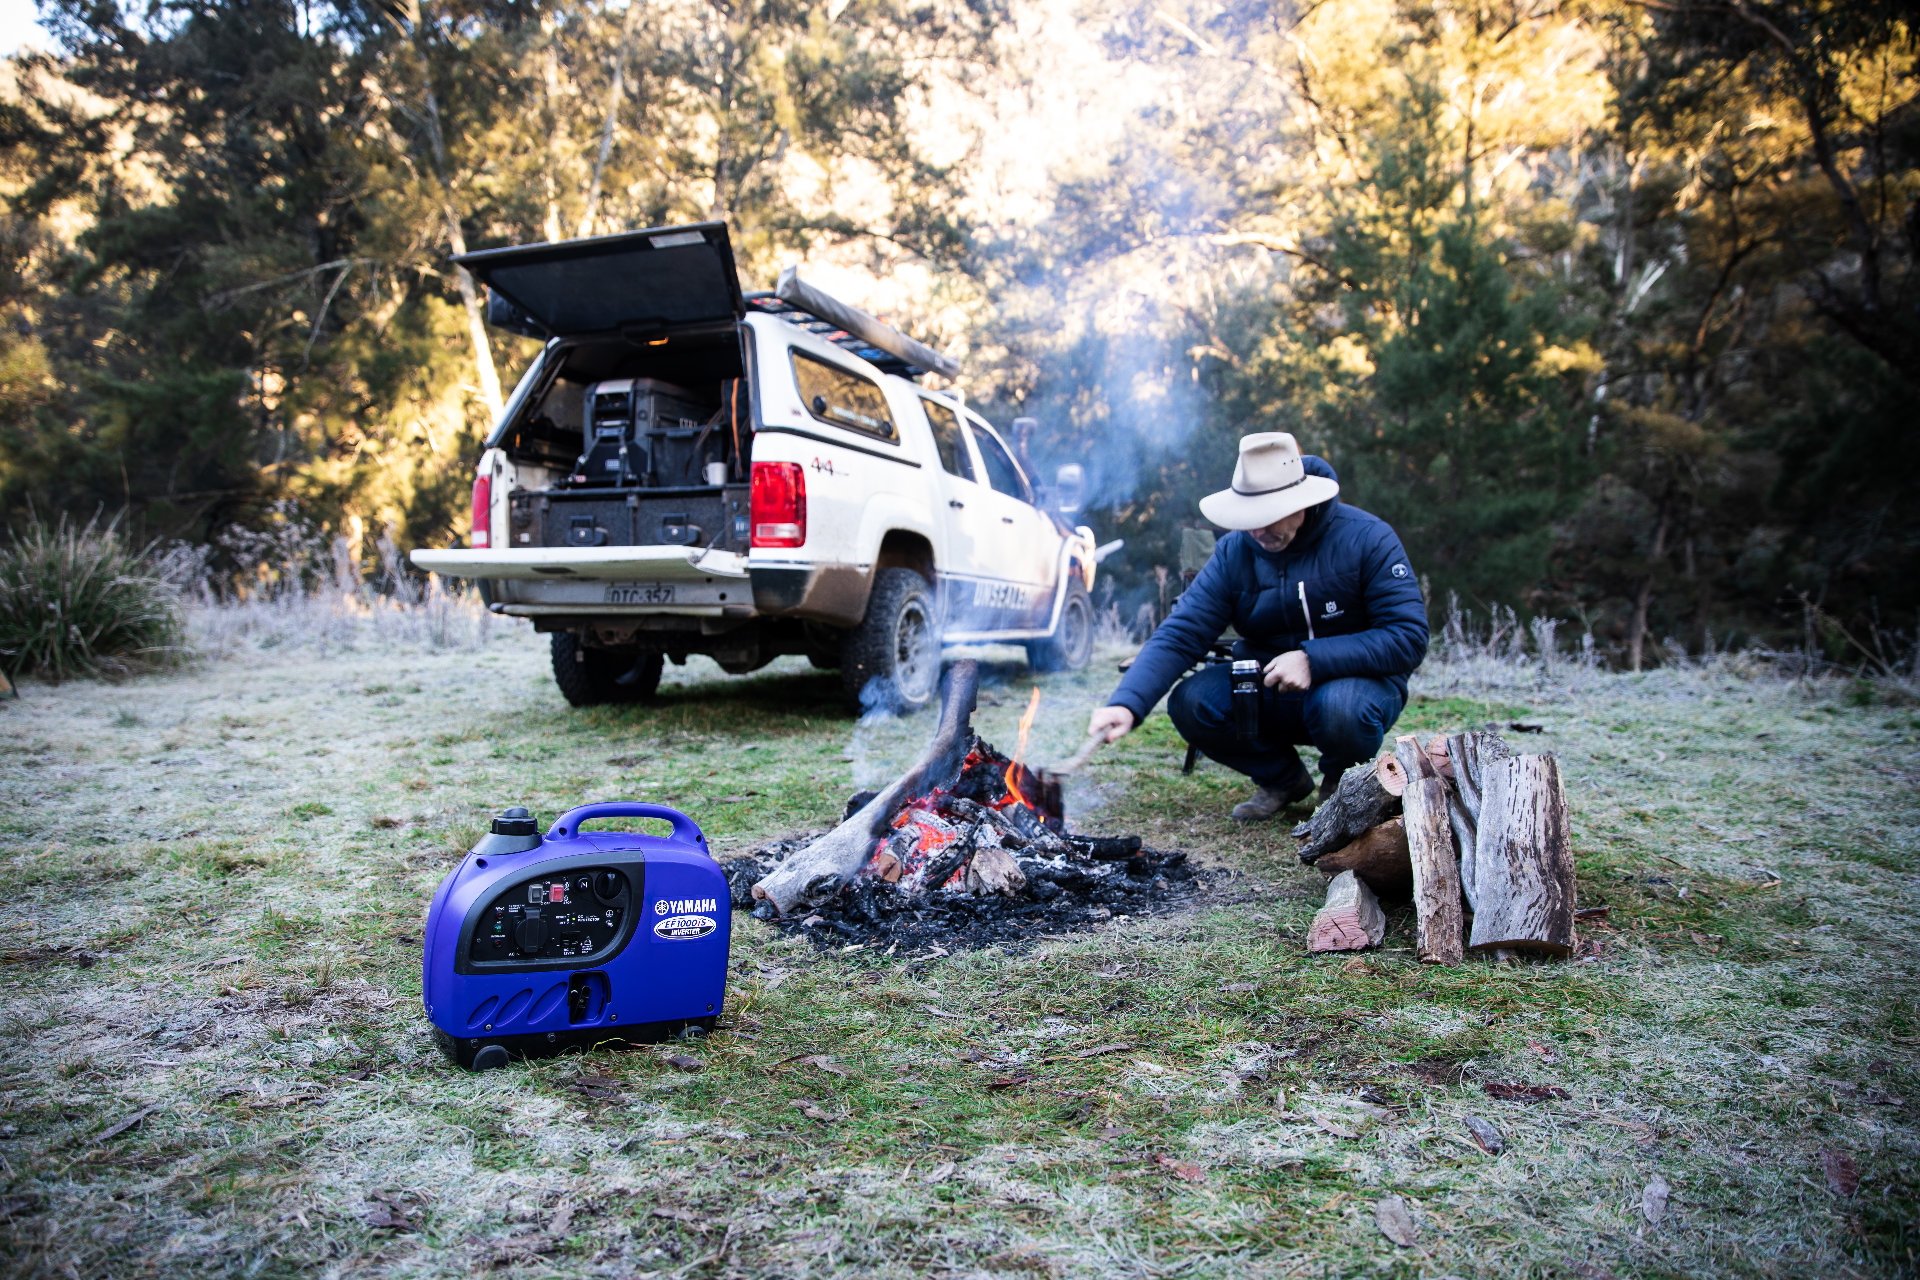 Yamaha Generator Review: Are They The Best Camping Generator?